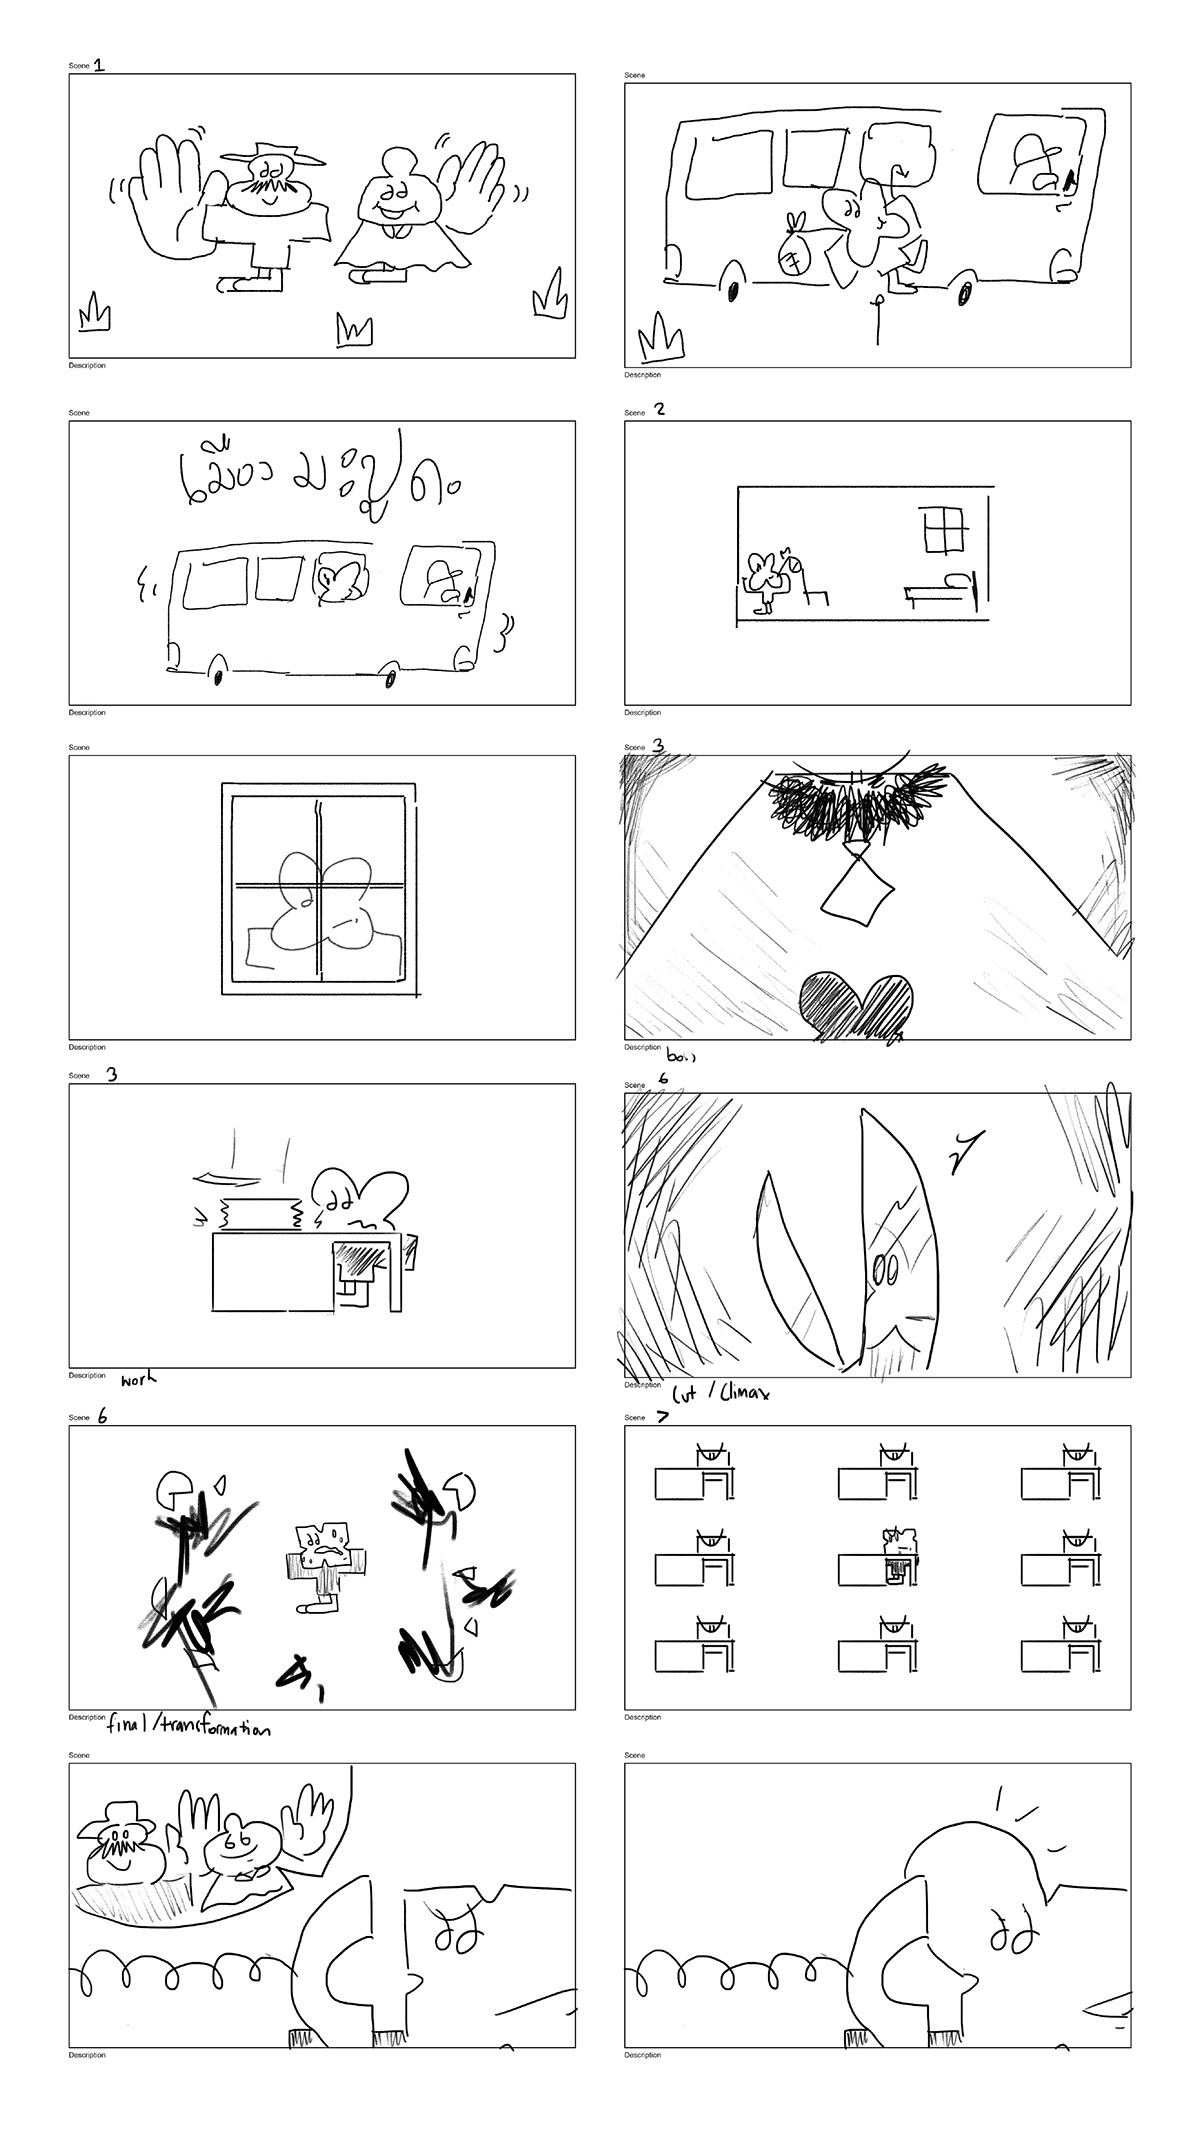 animation  cartoon Character Drawing  farm frame by frame Office rural idea Technique